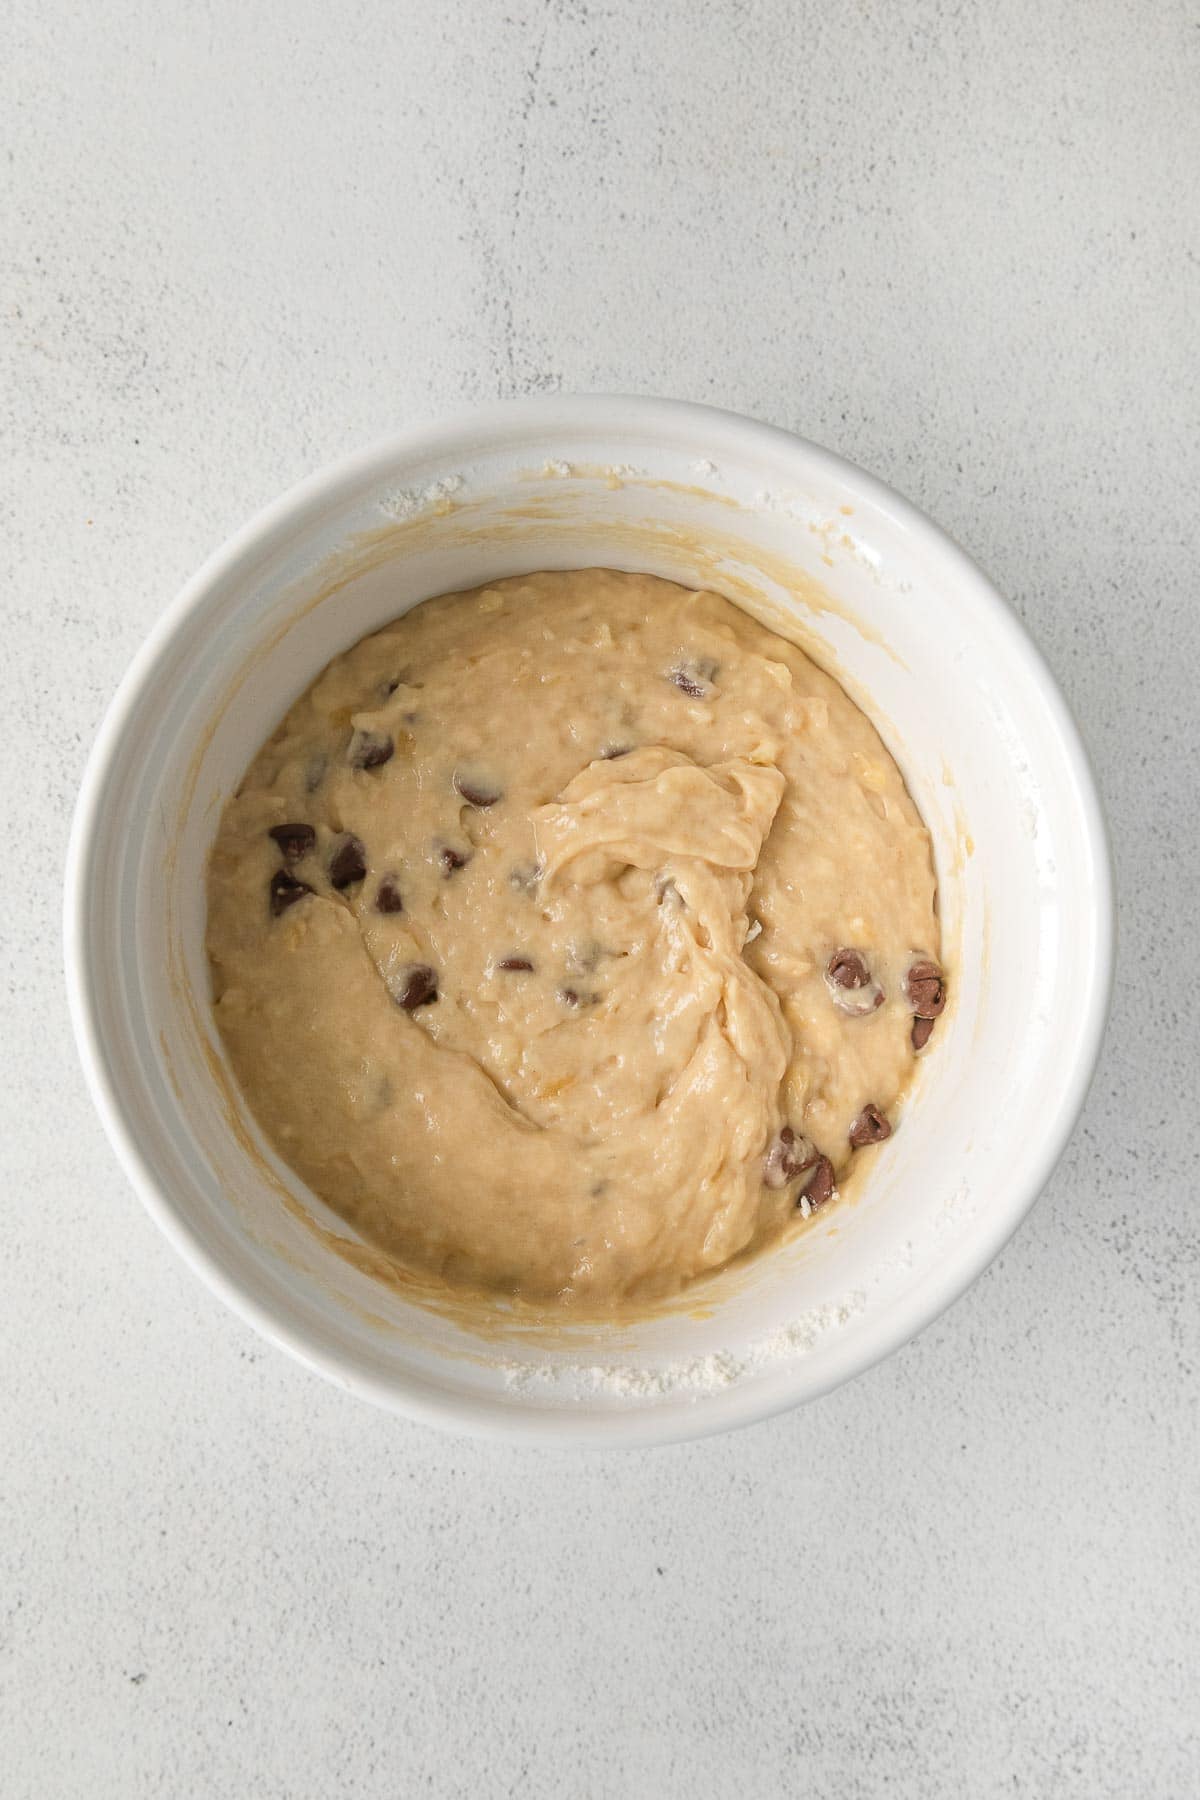 banana bread batter with chocolate chips in a white mixing bowl